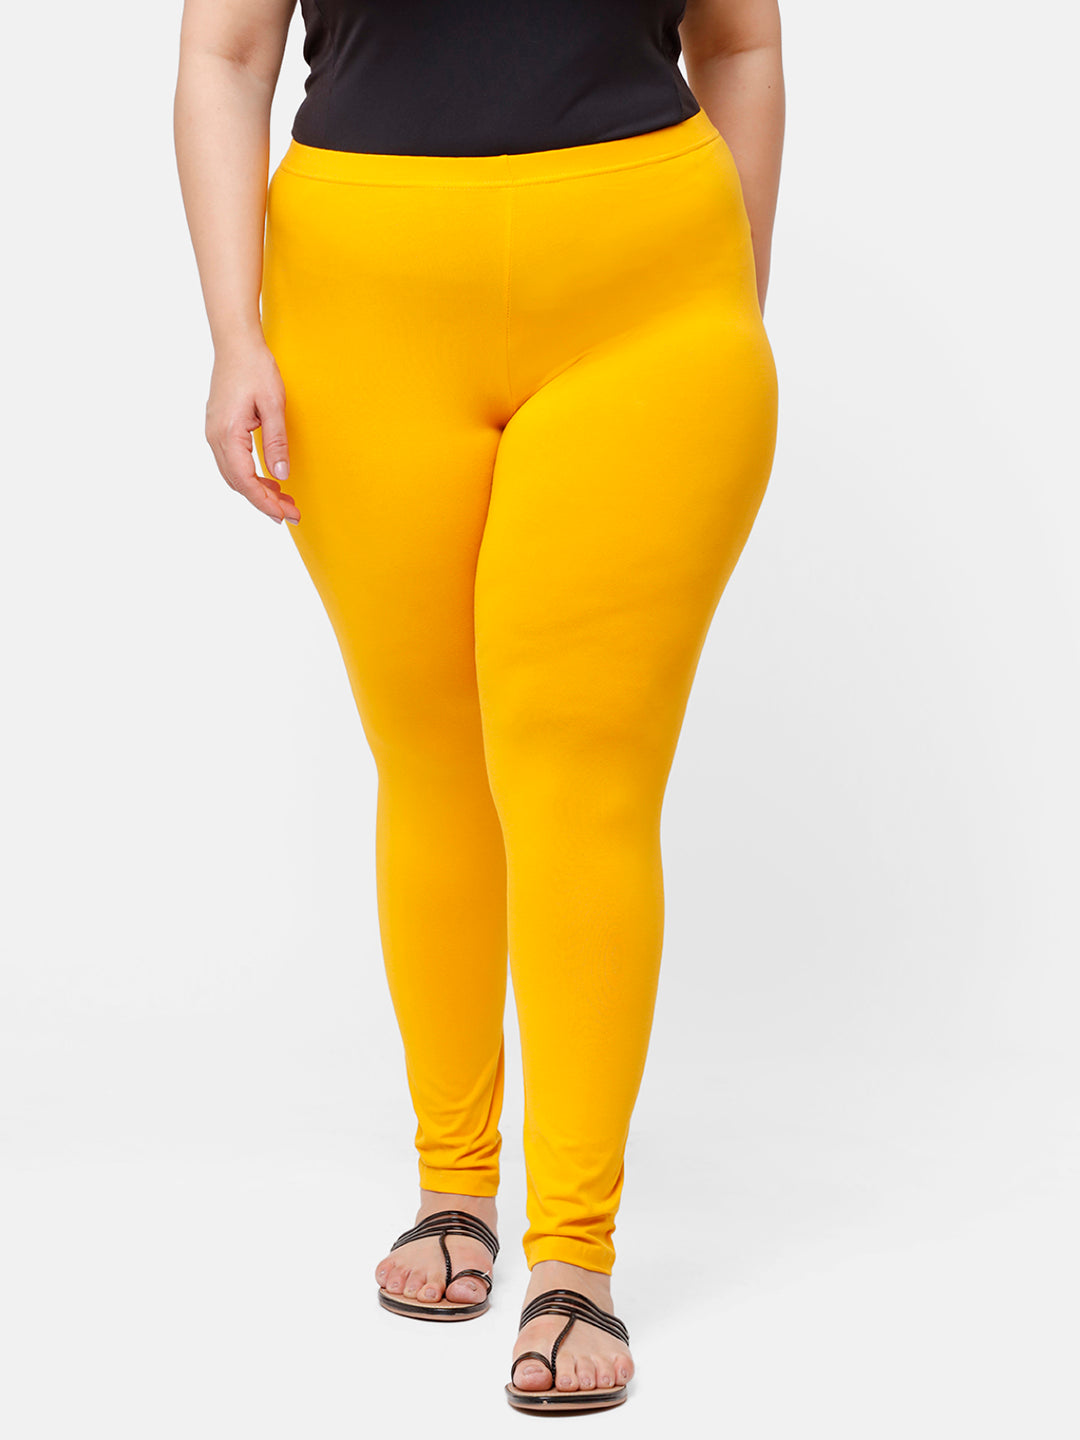 Solid Yellow Leggings for Women, Plain Yellow Leggings,high Waisted  Crossover Leggings With Pocket, Plus Size Printed Leggings,workout Pants -  Etsy